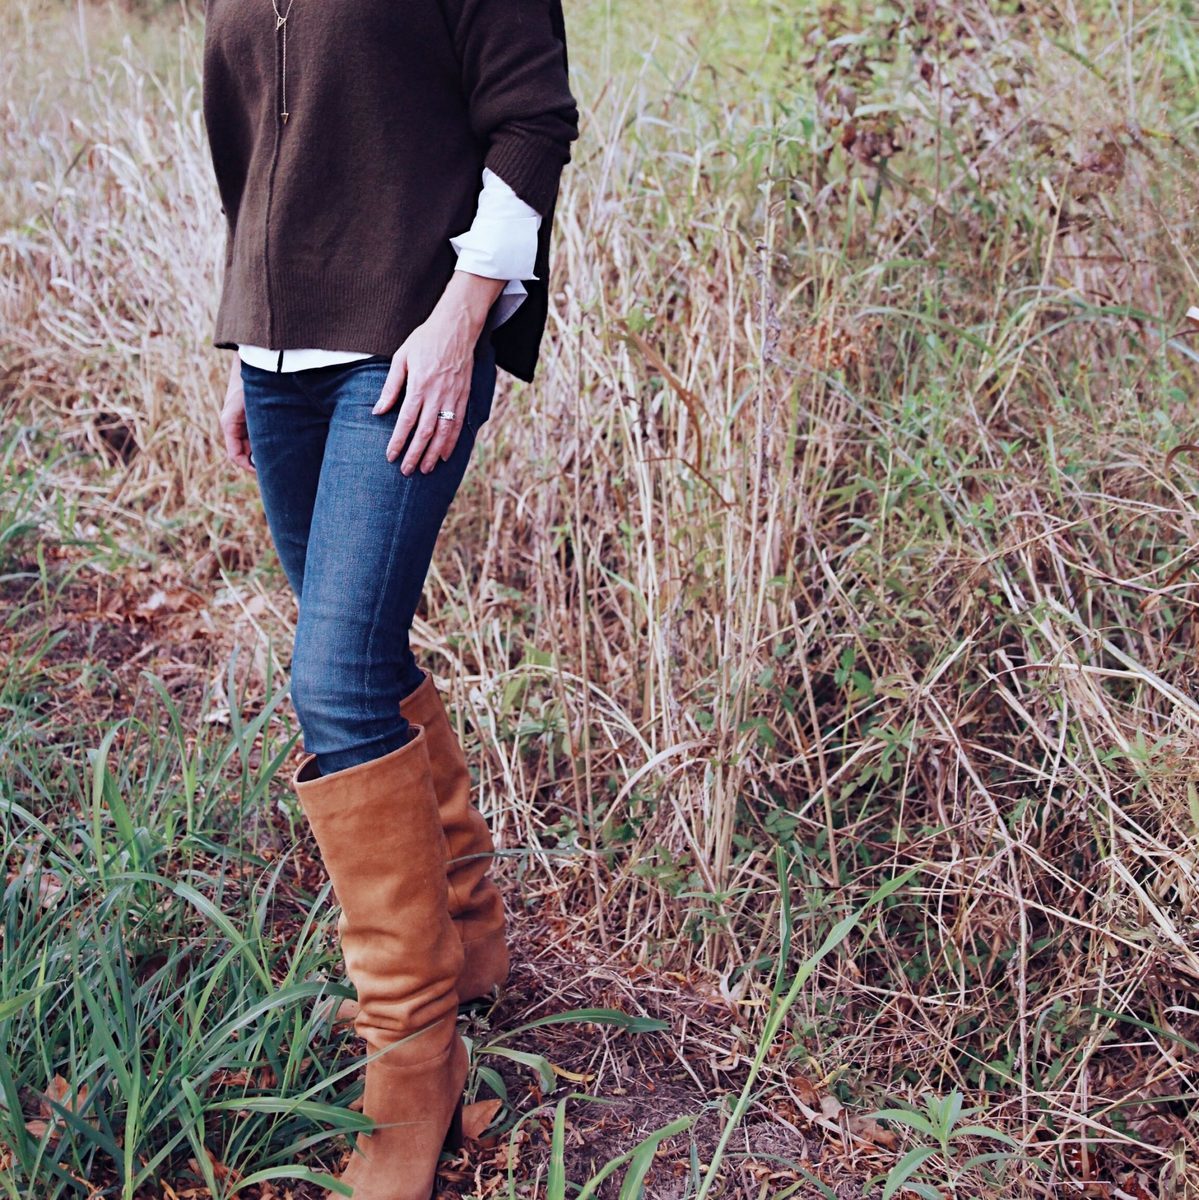 Wearing the camel colored suede slouchy sam edelman boots that are on now on SALE from Nordstrom with skinny jeans and a topshop olive green sweater